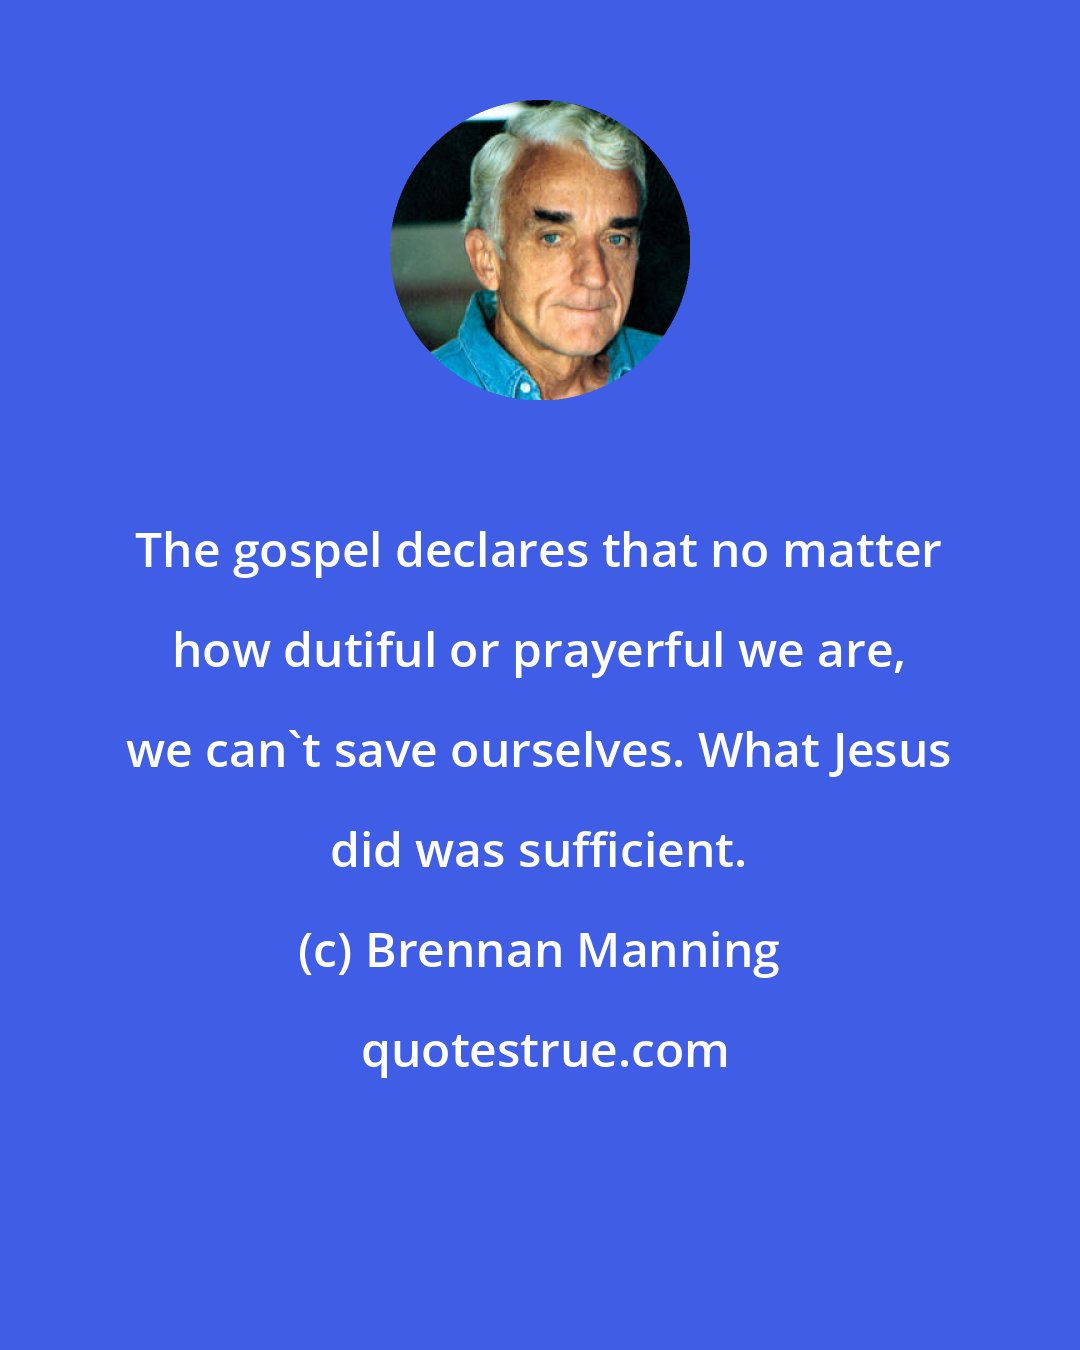 Brennan Manning: The gospel declares that no matter how dutiful or prayerful we are, we can't save ourselves. What Jesus did was sufficient.